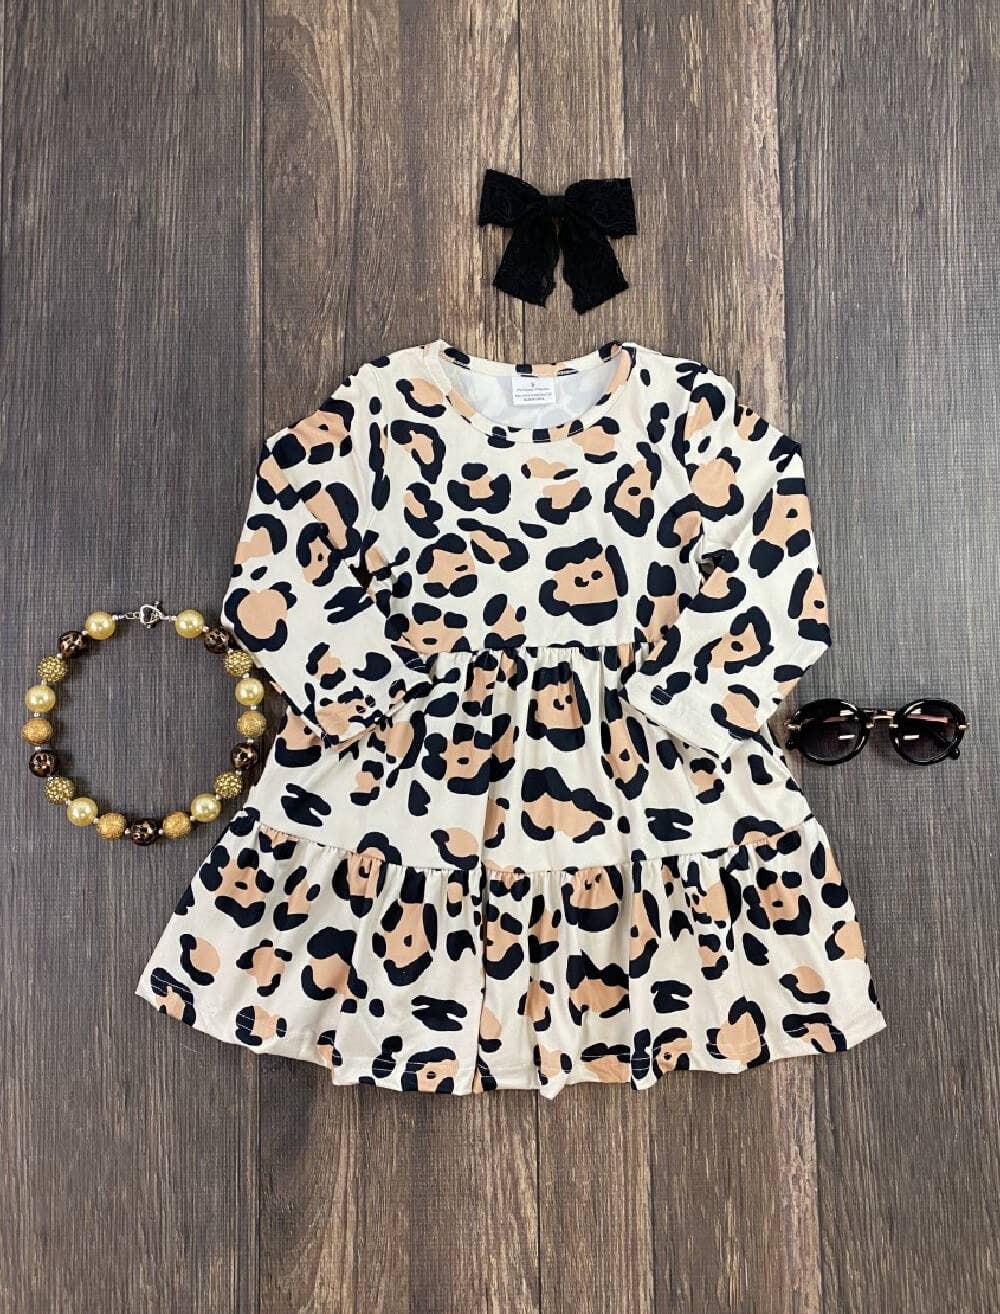 Animal Print Tiered Twirl Dress - 40% OFF | Bows, Bling & Sparkly Things!